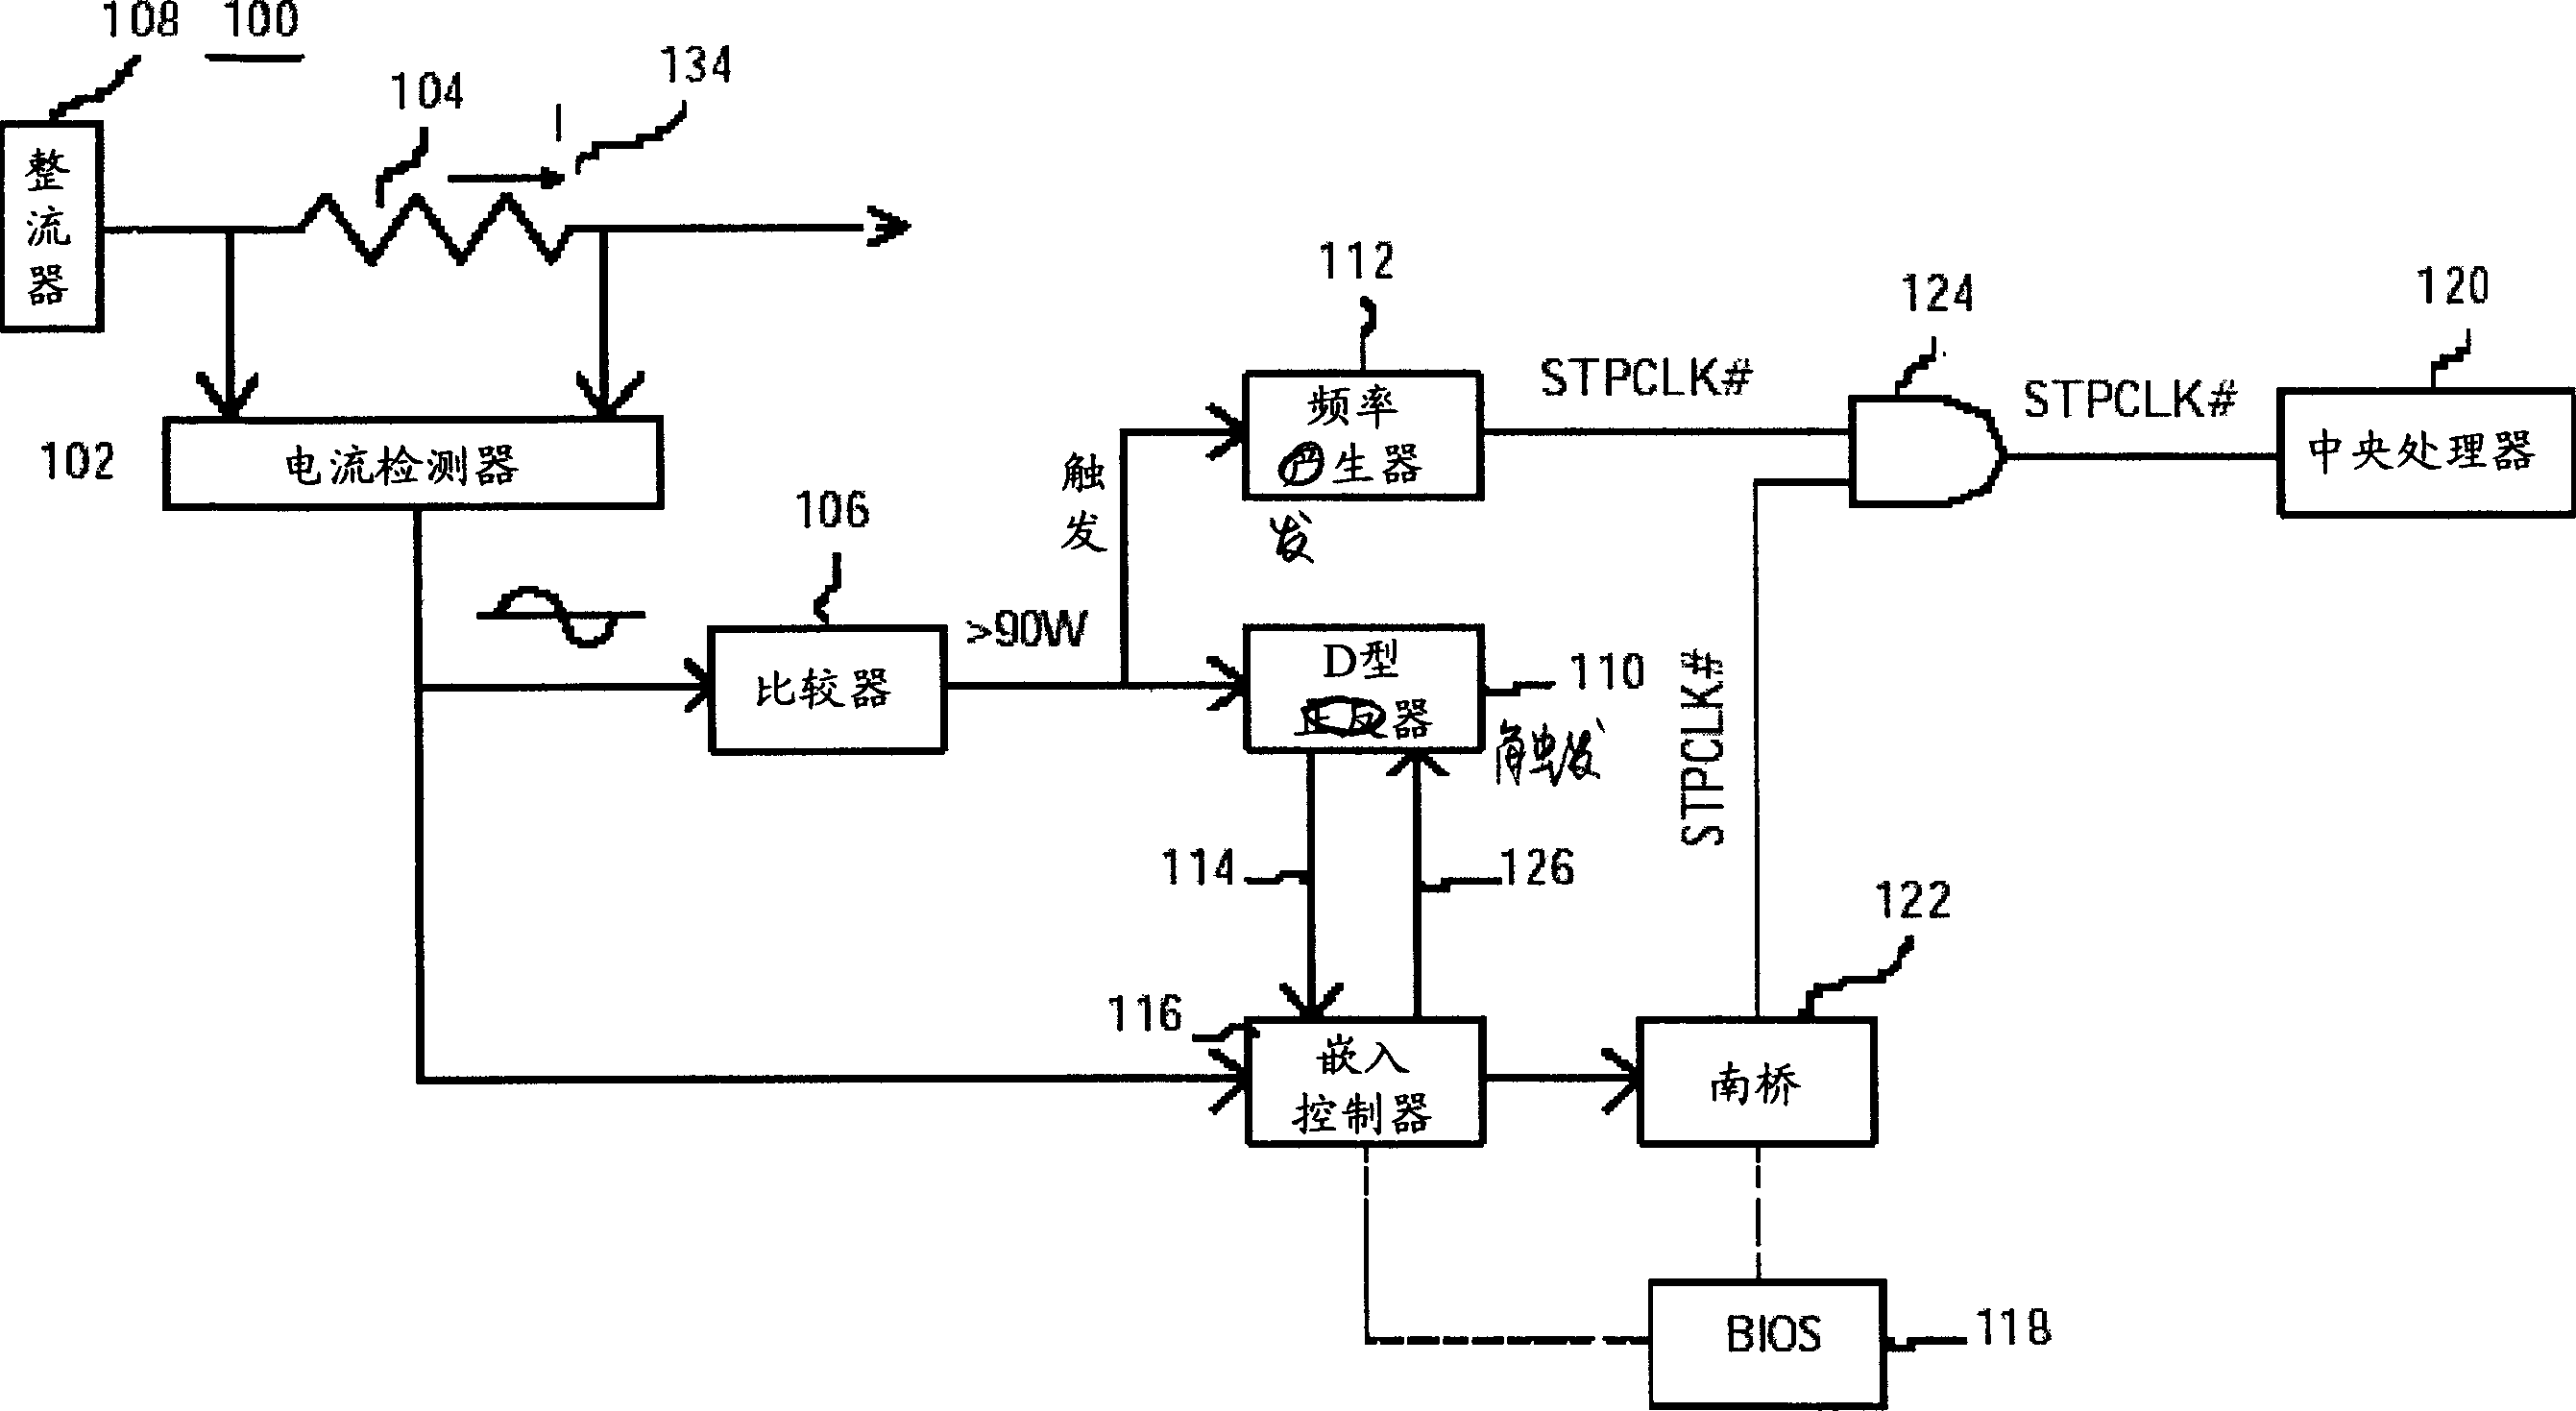 Apparatus for dynamically regulating computer system power consumption